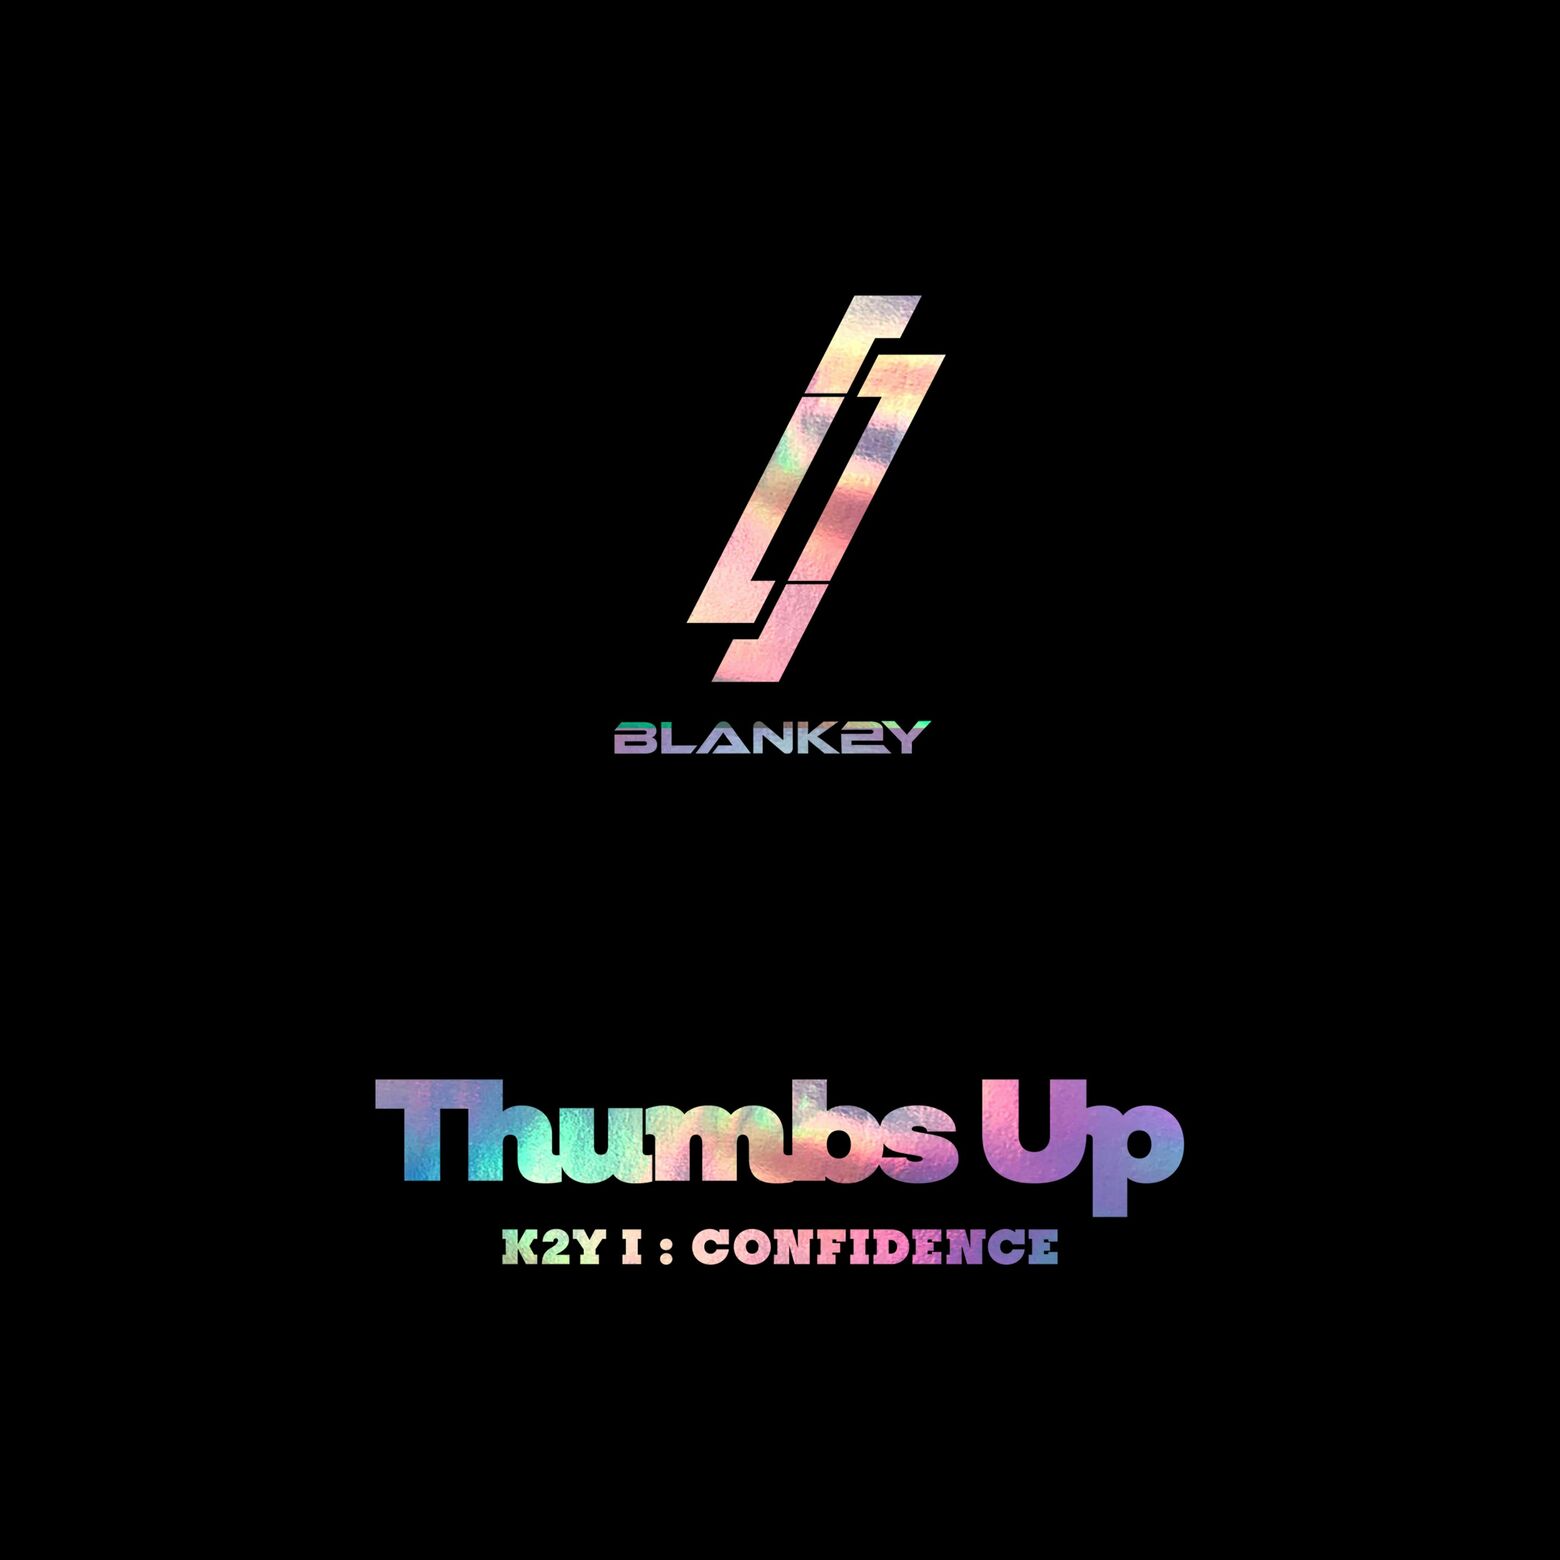 BLANK2Y – K2Y I: CONFIDENCE [Thumbs Up] – EP